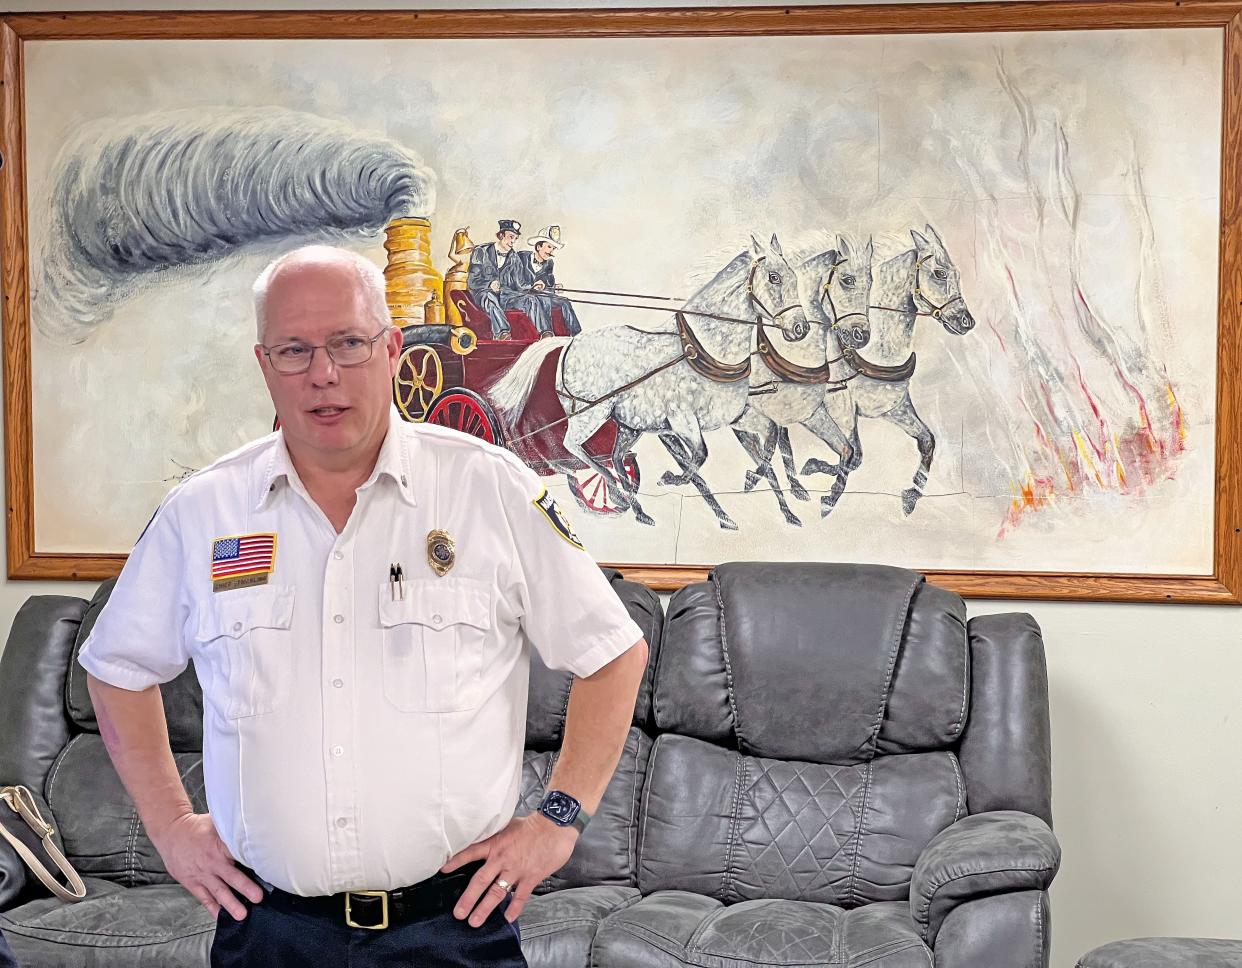 Mansfield fire Chief Steve Strickling is retiring after 32½ years serving the residents of Mansfield.